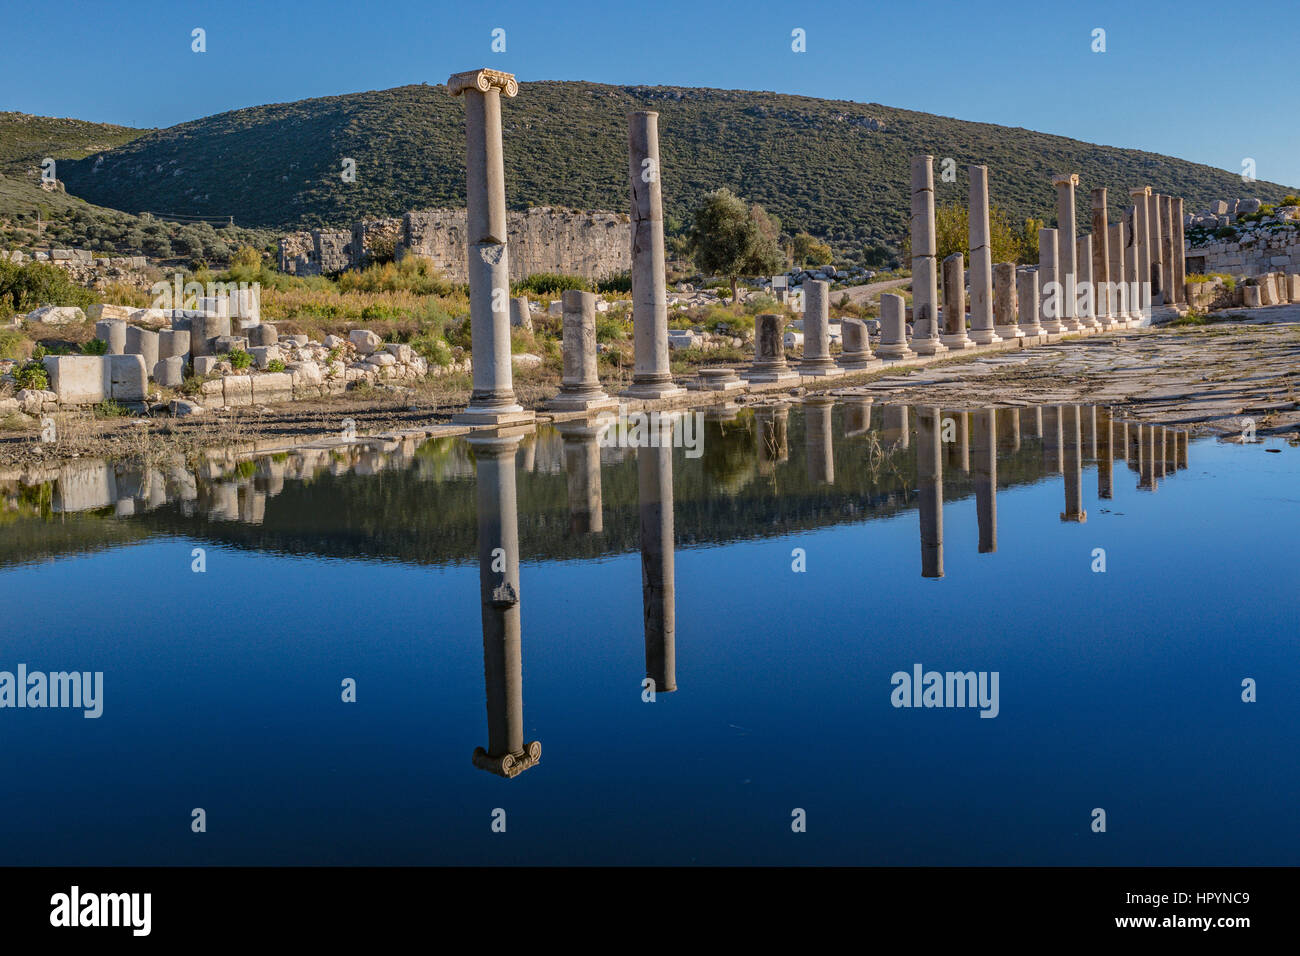 reflections of the columns on the pond surface pillar street of ancient patara Stock Photo